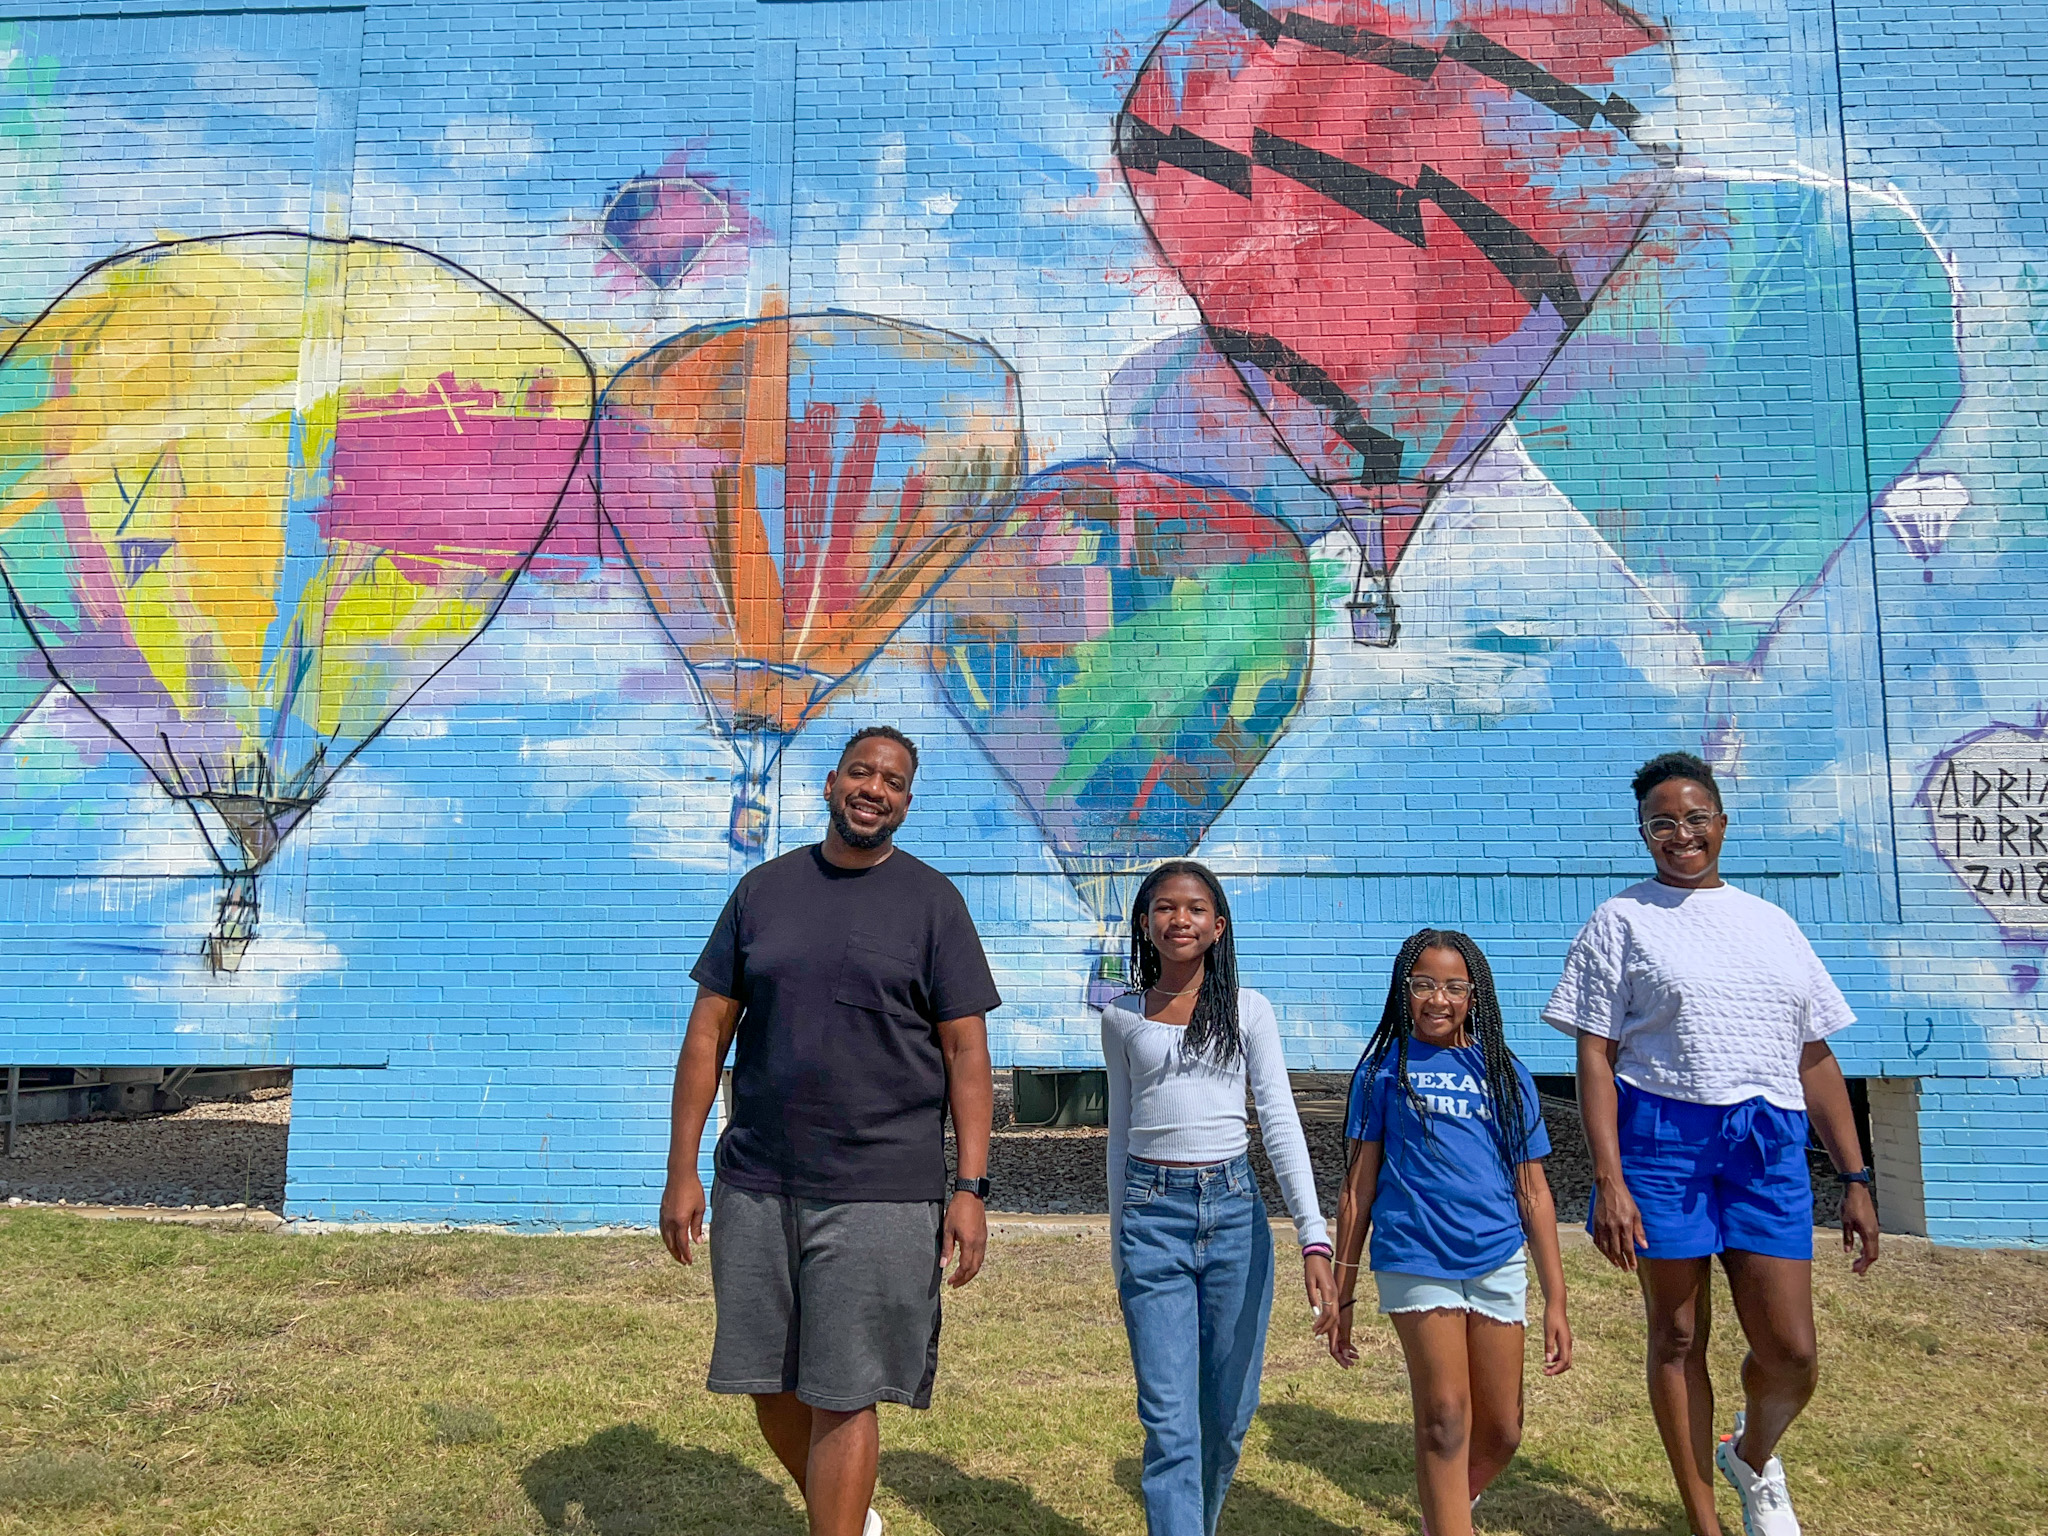 Things to Do in Plano TX by The Spring Break Family posing in front of a hot air balloon mural